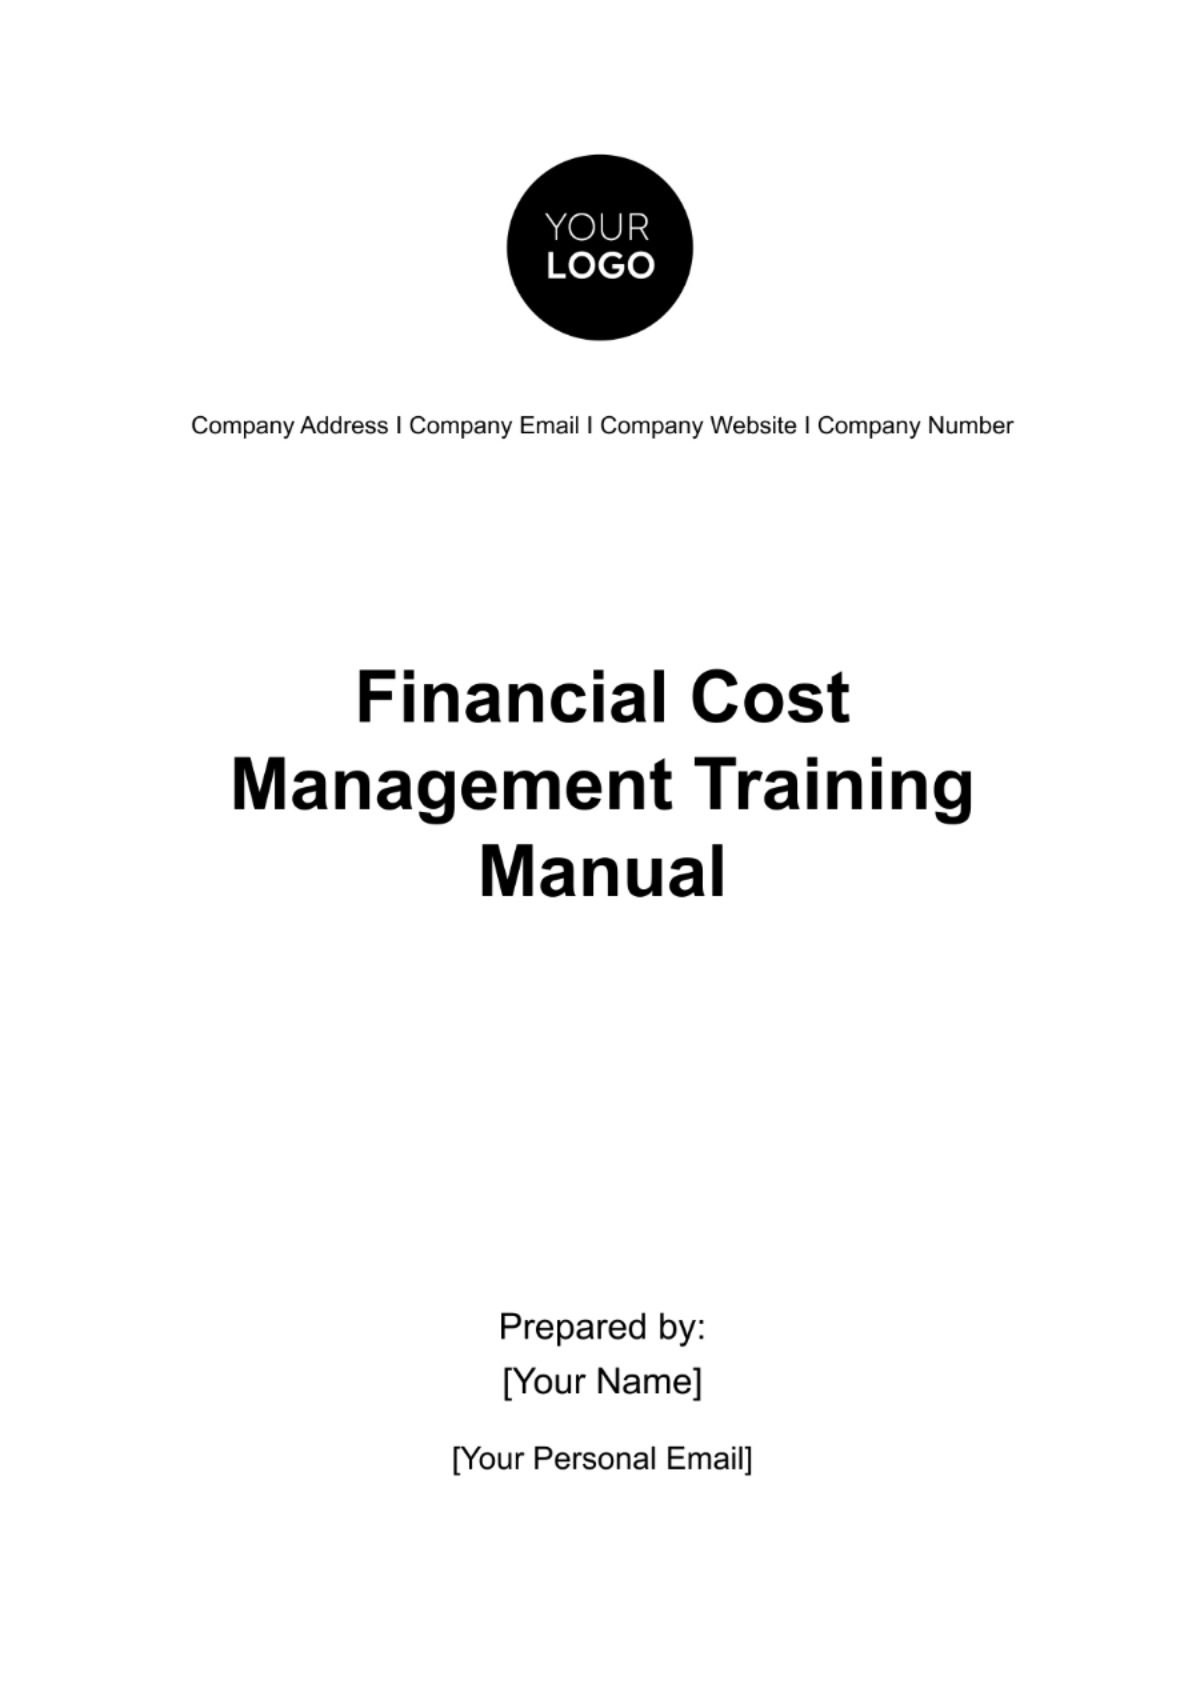 Free Financial Cost Management Training Manual Template